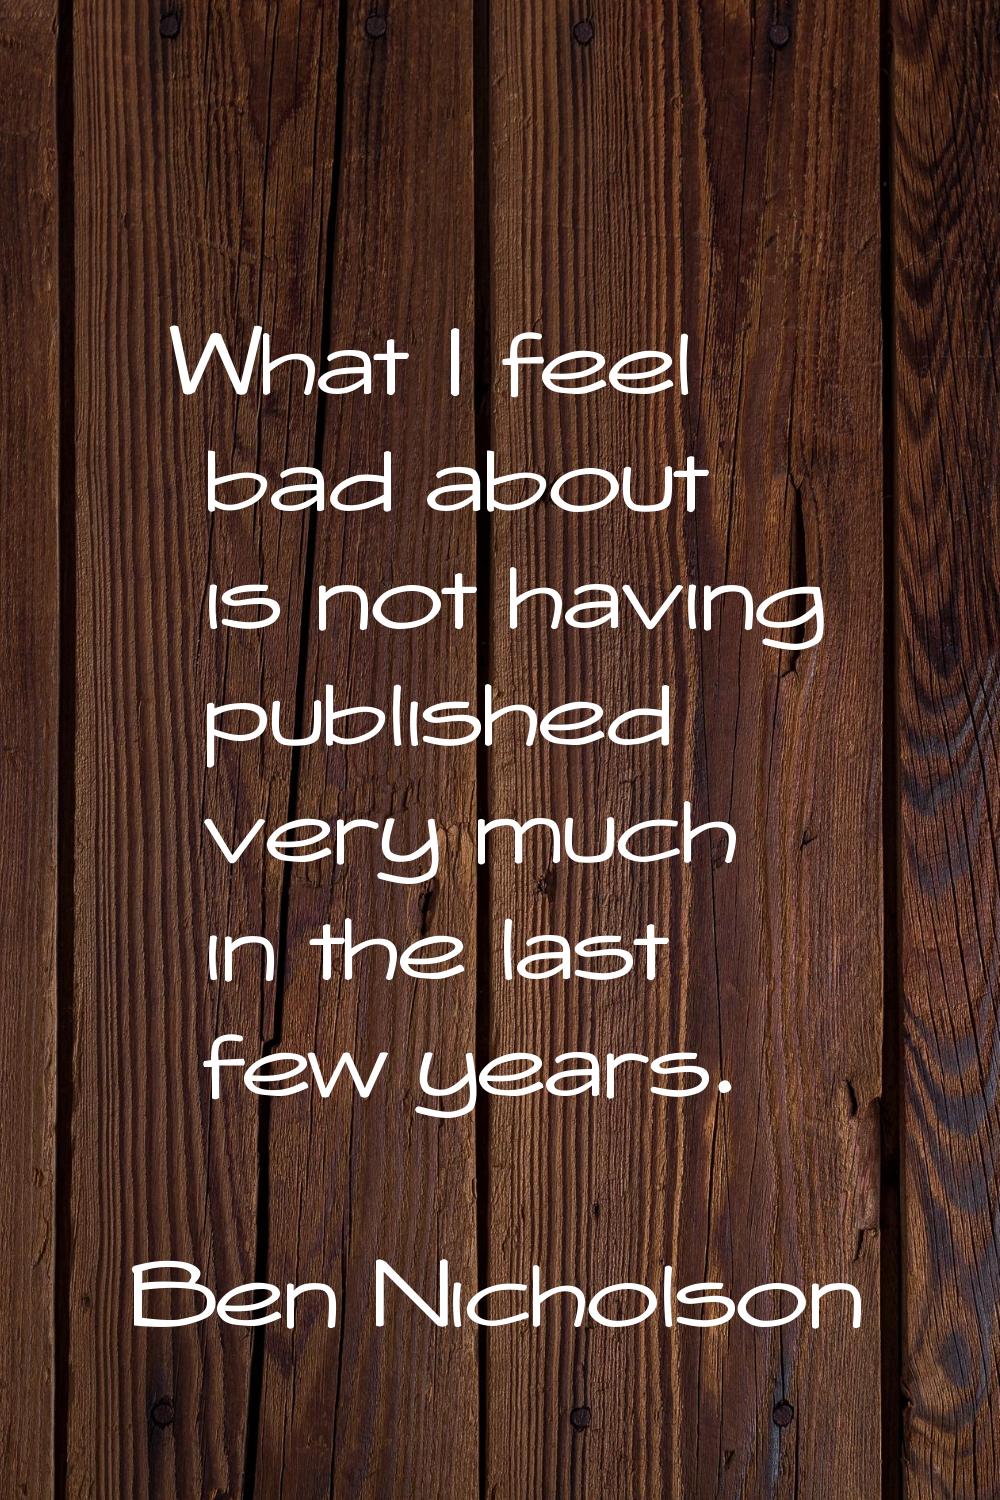 What I feel bad about is not having published very much in the last few years.